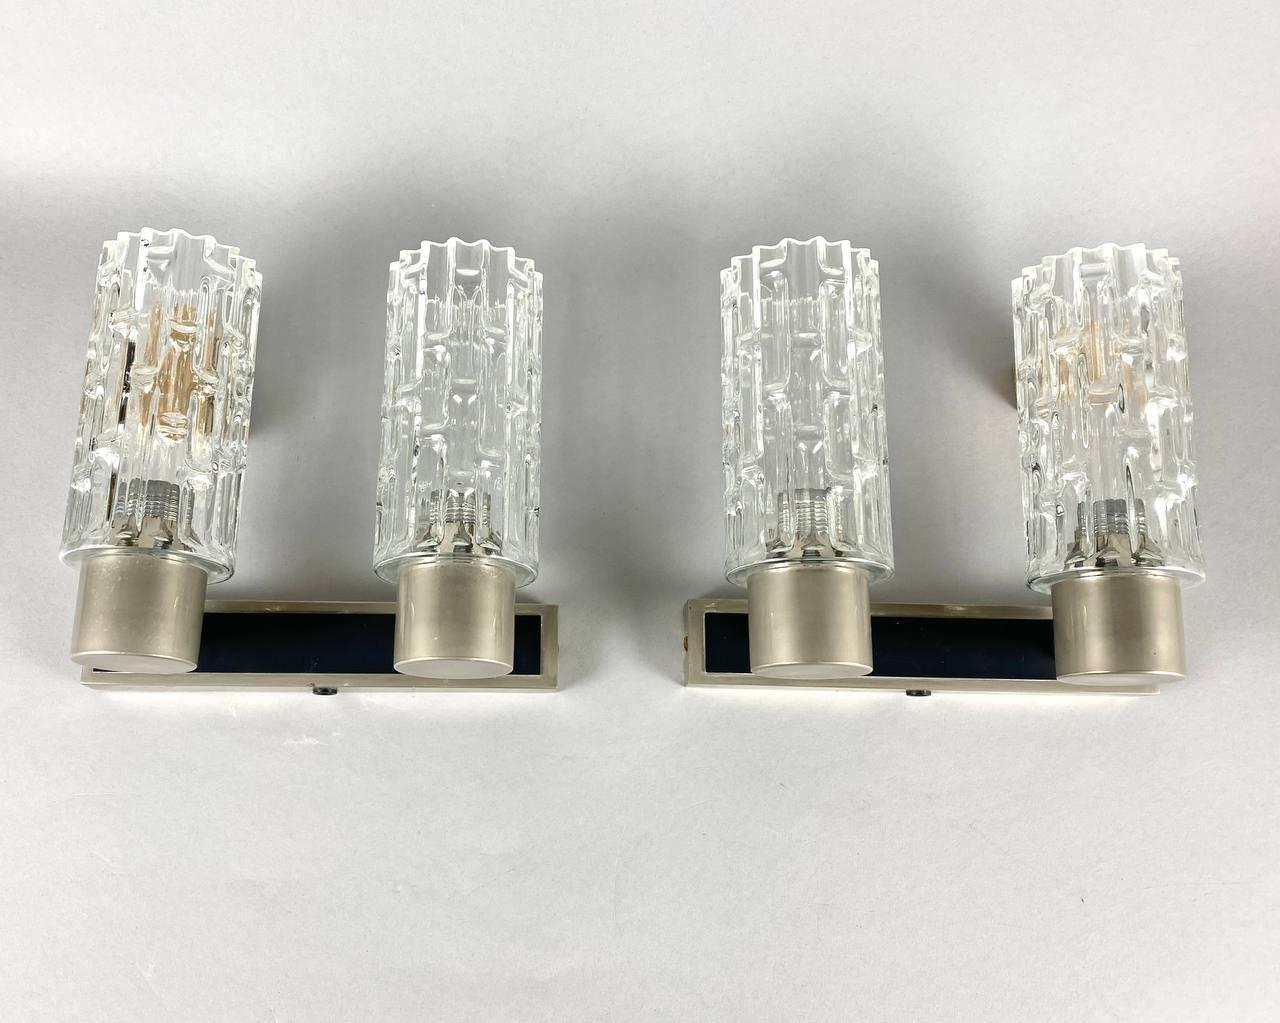 Beautiful set of two wall lights by Hillebrand, Germany.

A fine set of 2 Hillebrand metal and glass wall lamps in Mid-Century Modern style. 

The textured cylindrical glass shades mounted to a metal base.

Hillebrand brings German design and